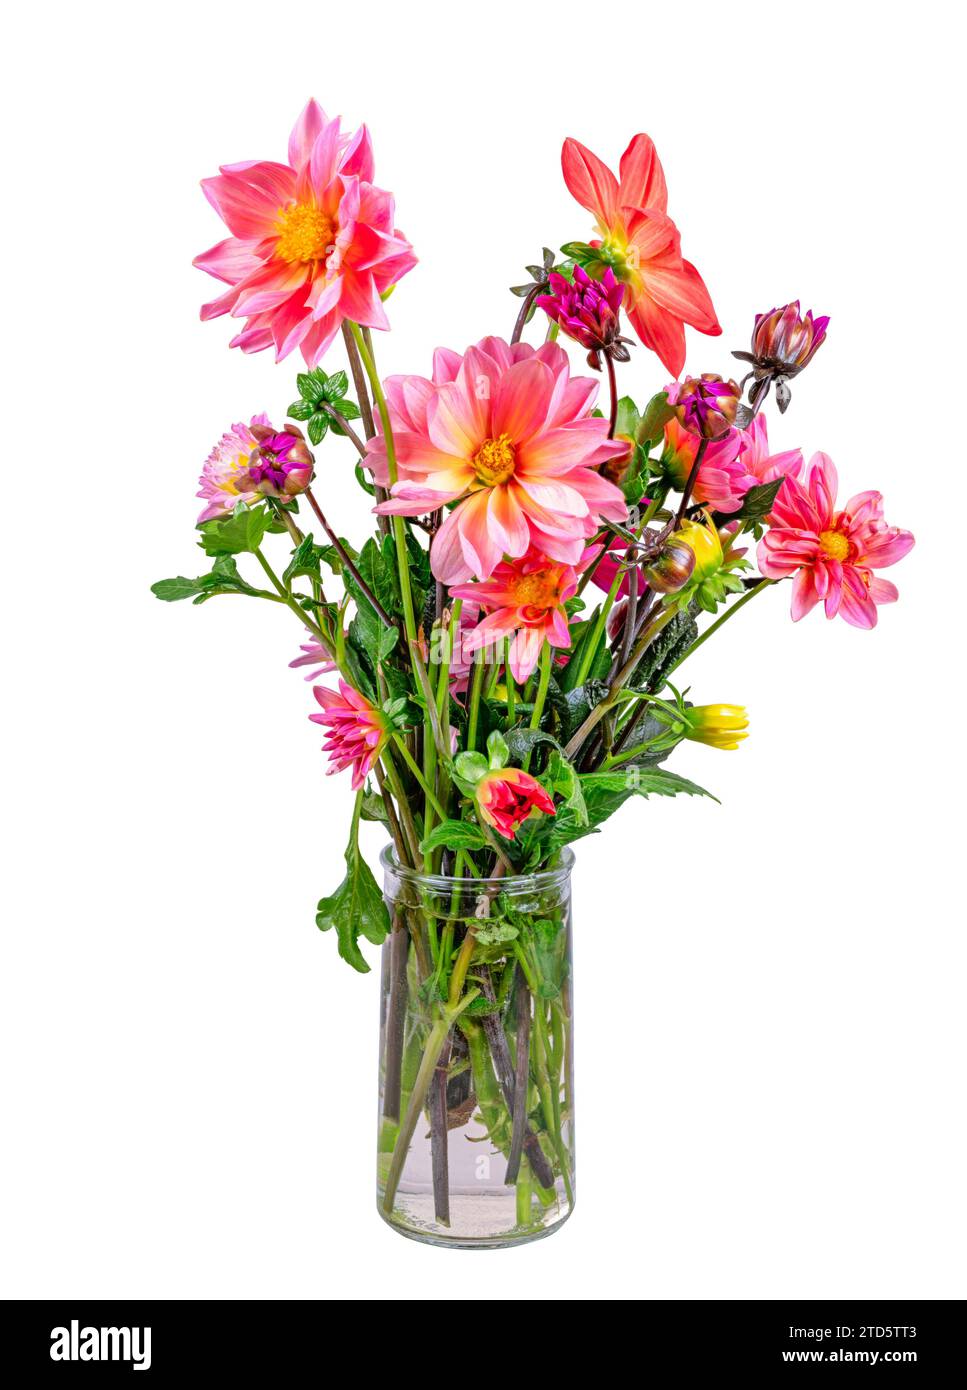 Closeup of an isolated dahlia flower arrangement in a glass vase Stock Photo